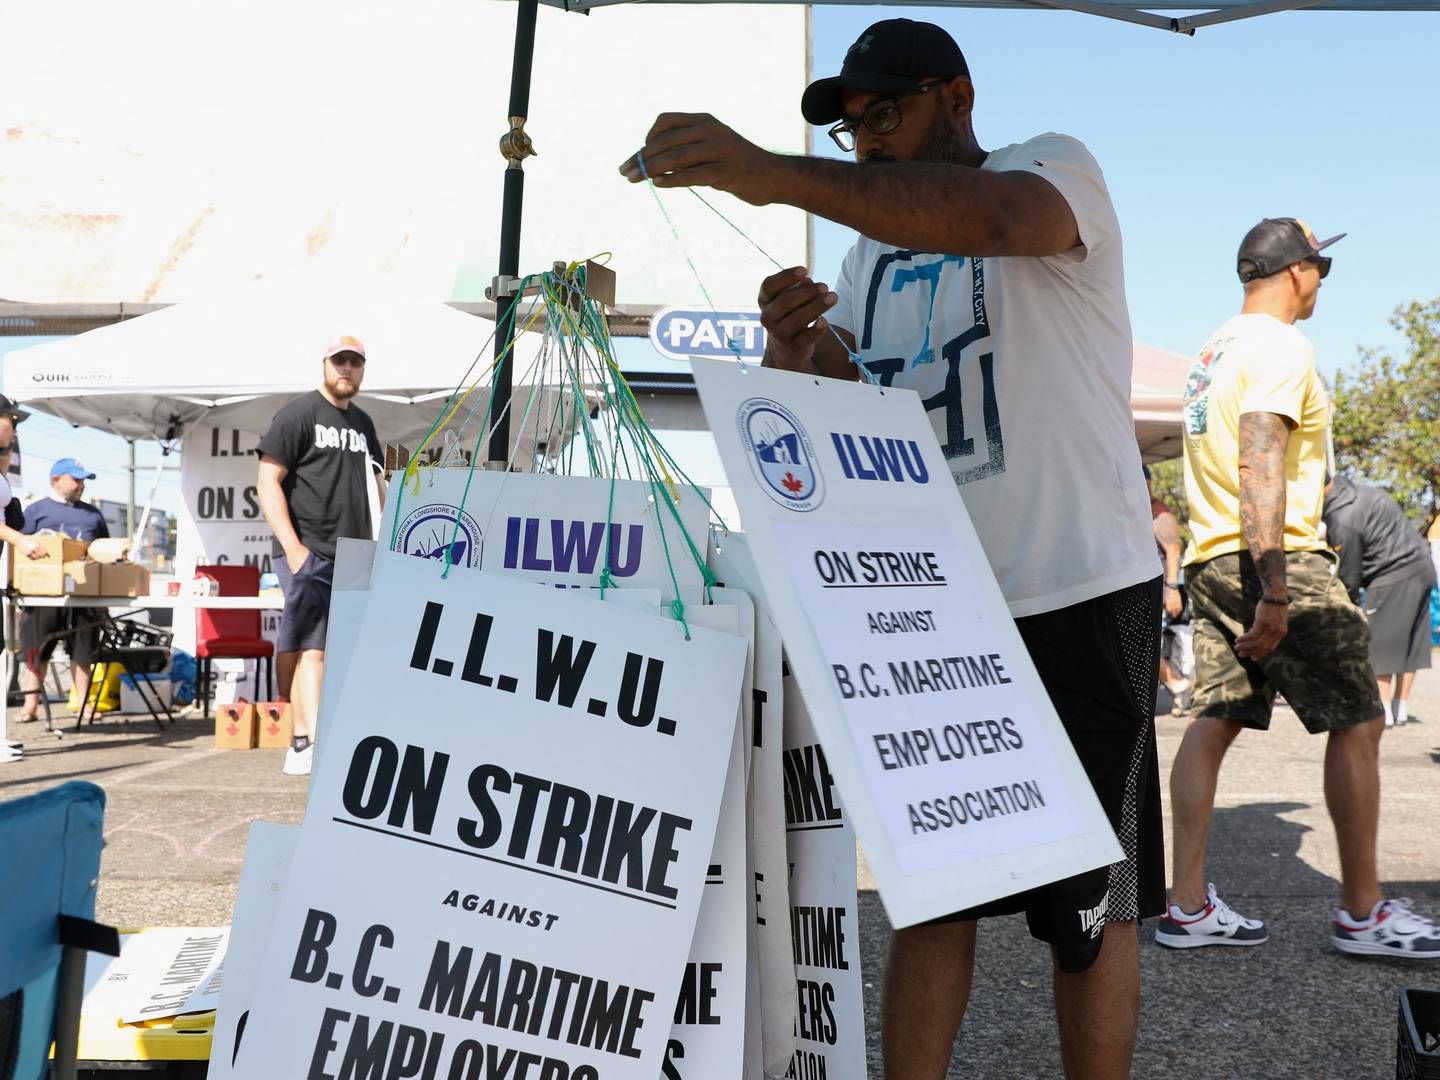 A preliminary four-year agreement has been reached between the union ILWU and the employers' association BCMEA after months of negotiations. | Photo: Chris Helgren/Reuters/Ritzau Scanpix